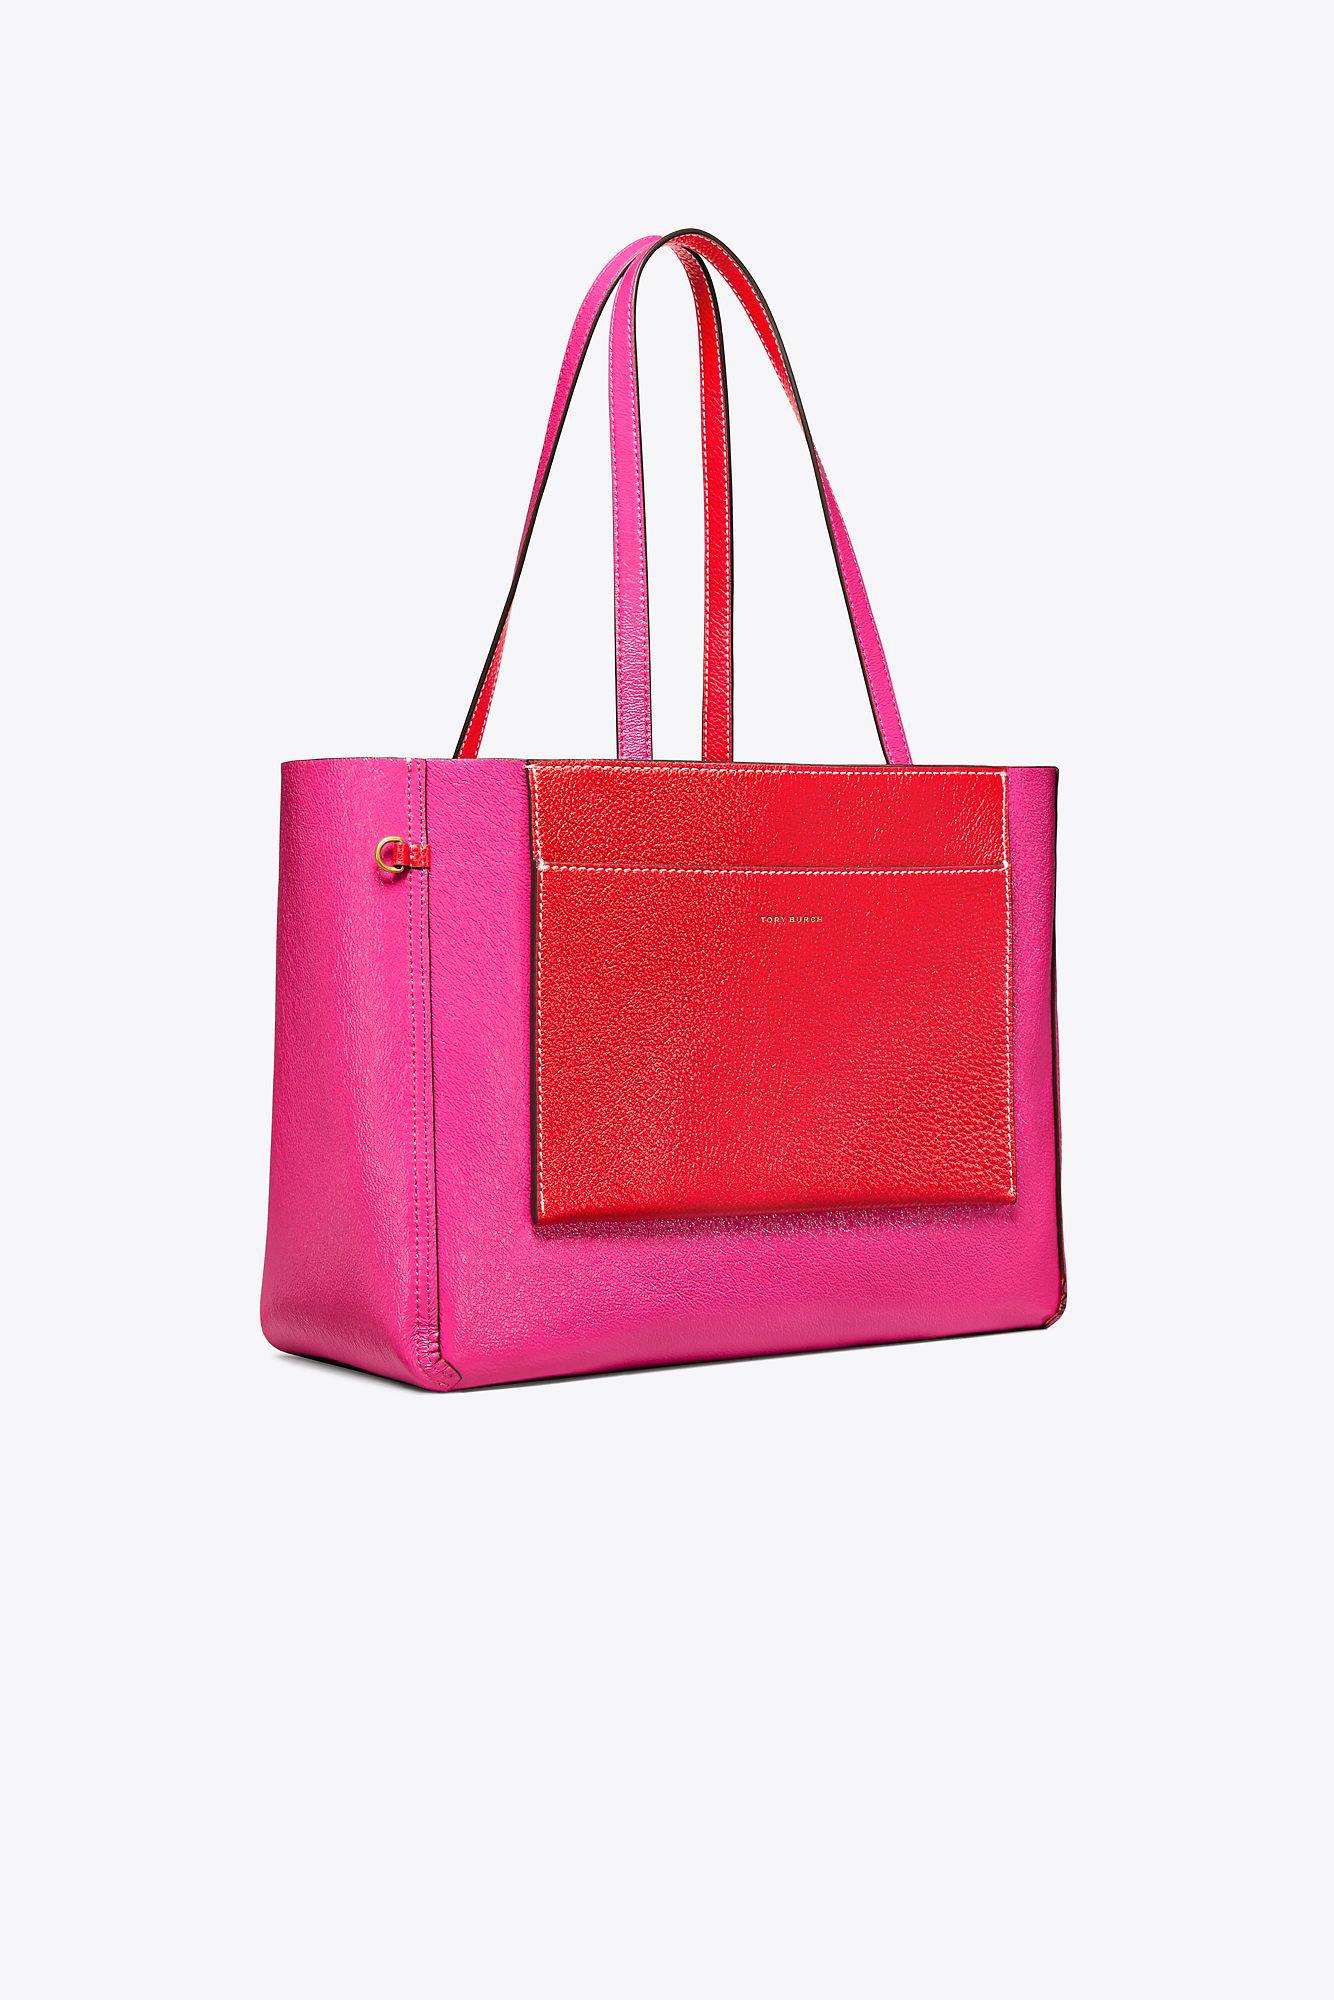 Tory Burch Leather Perry Mini Tote in Red - Lyst